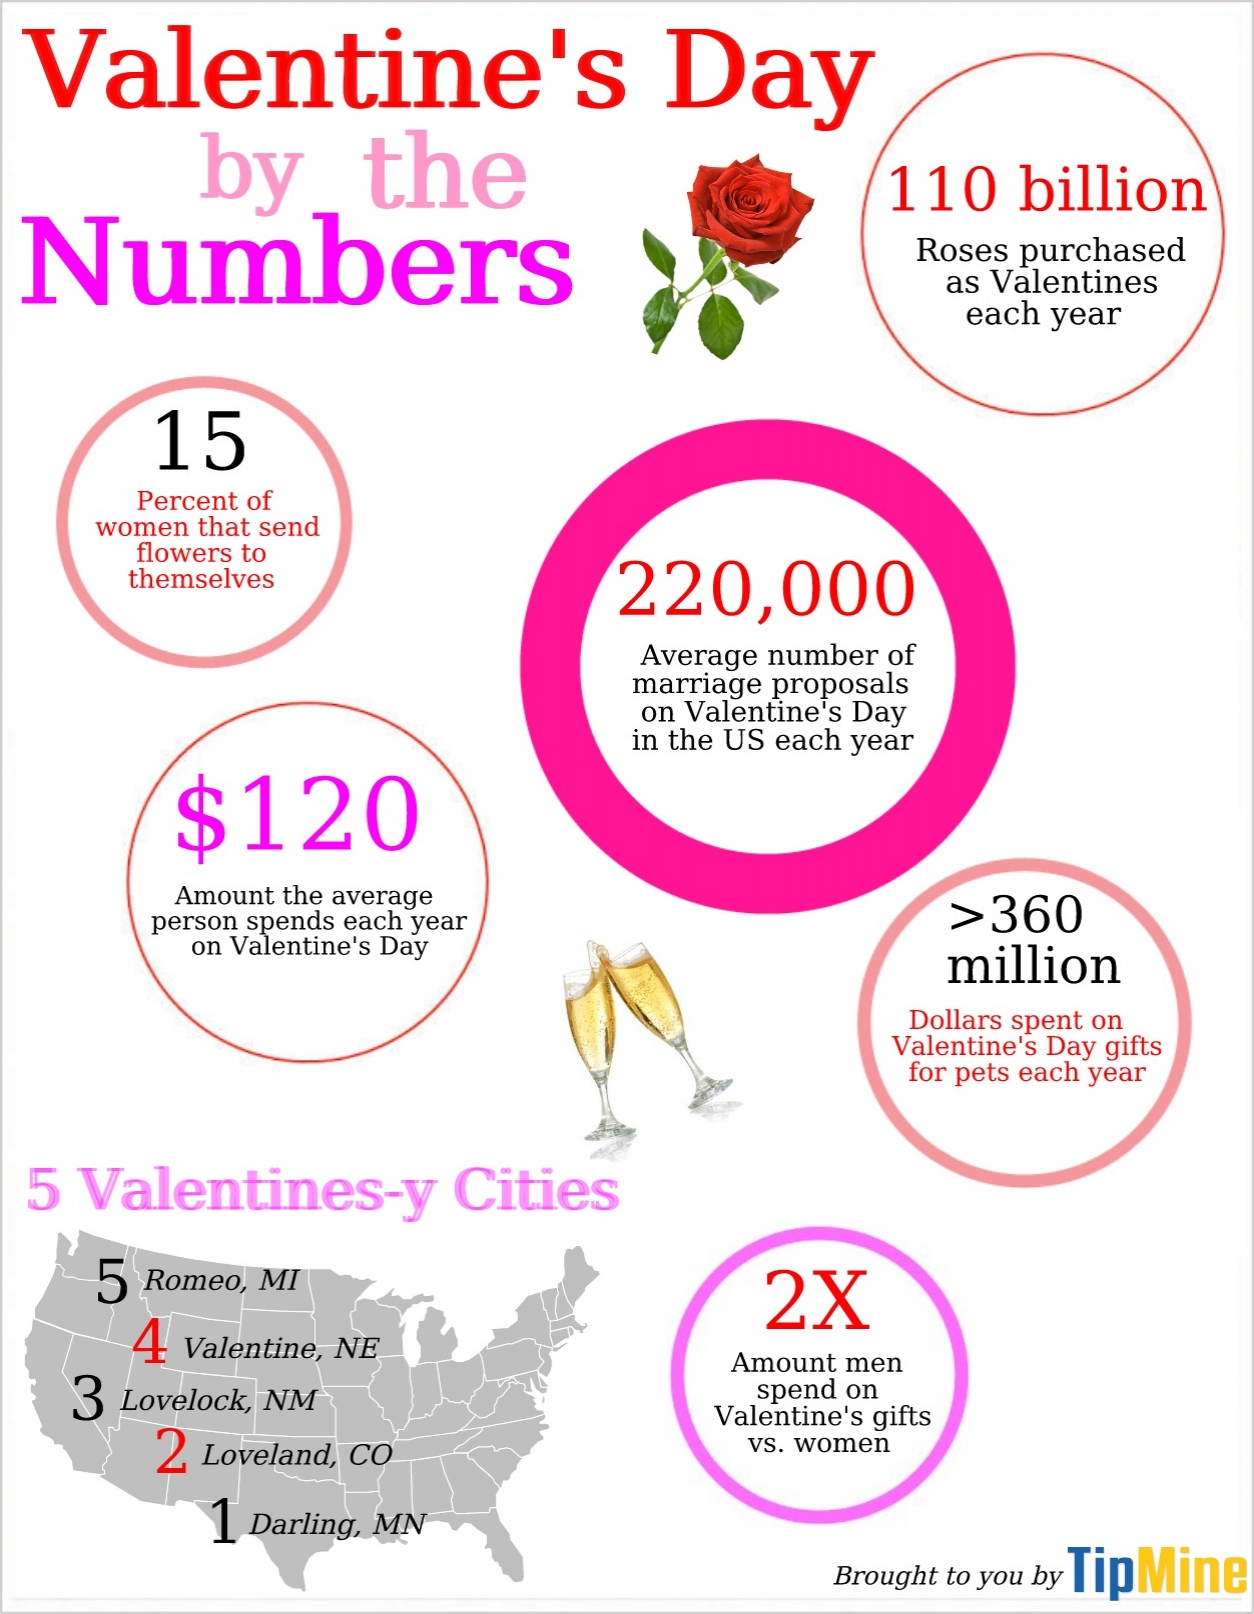 Ever wondered just how many roses are purchased